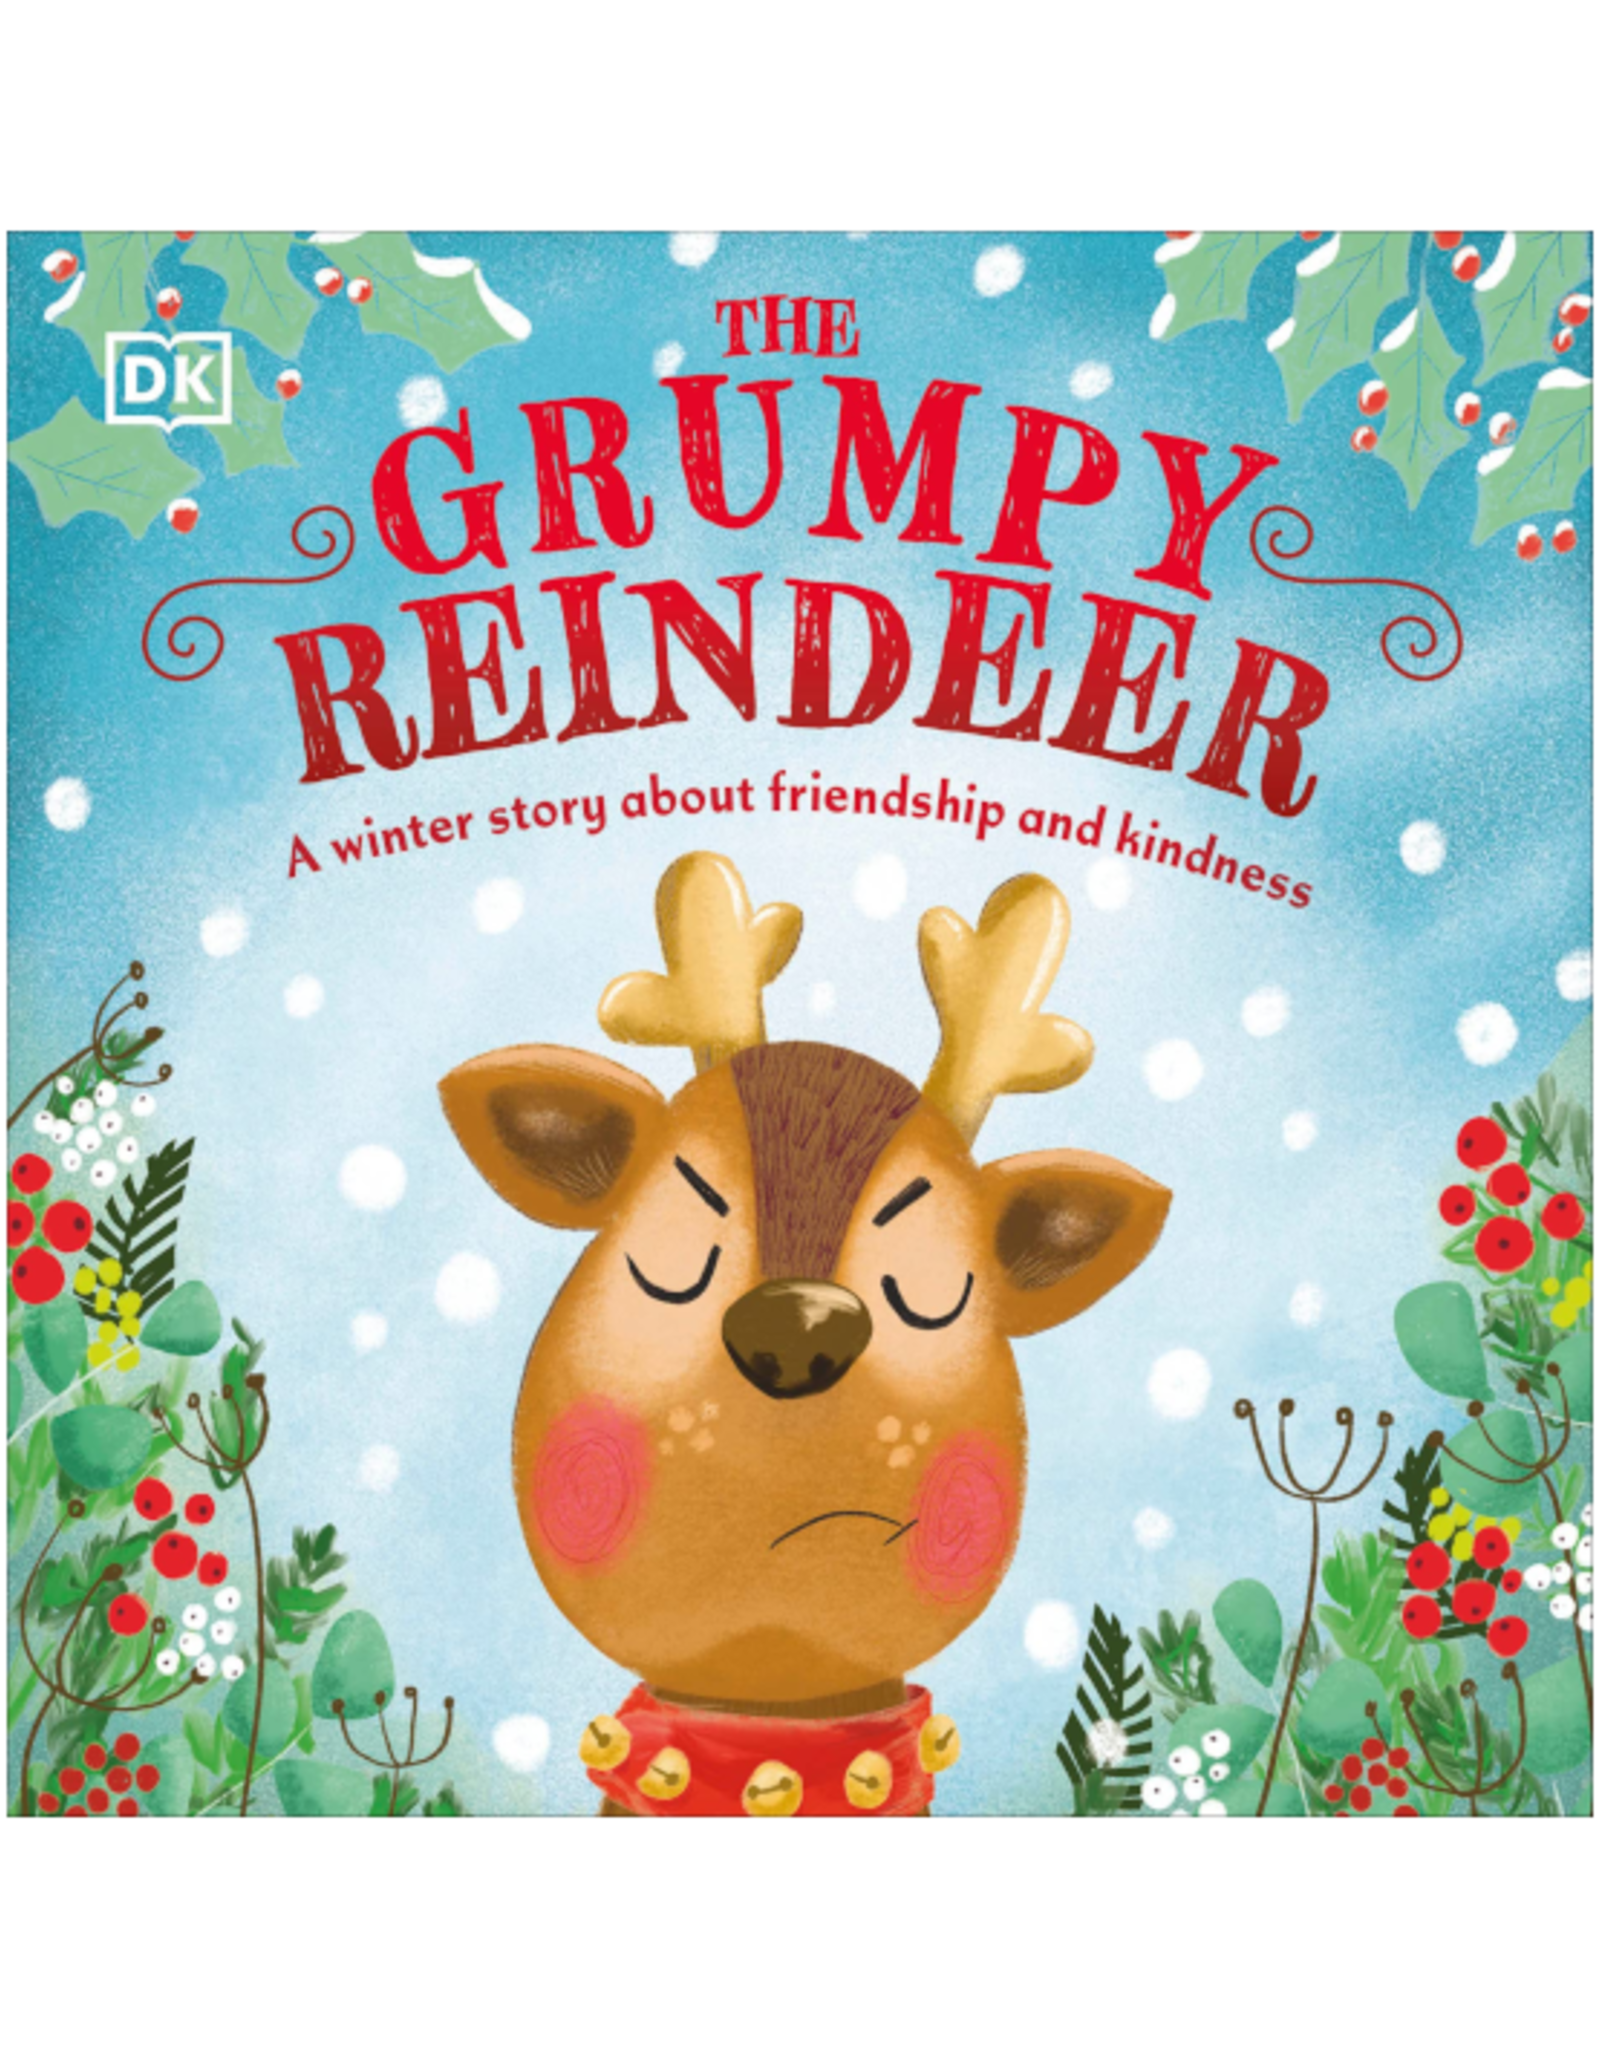 Penguin Random House Books Book - The Grumpy Reindeer: A Winter Story About Friendship and Kindness